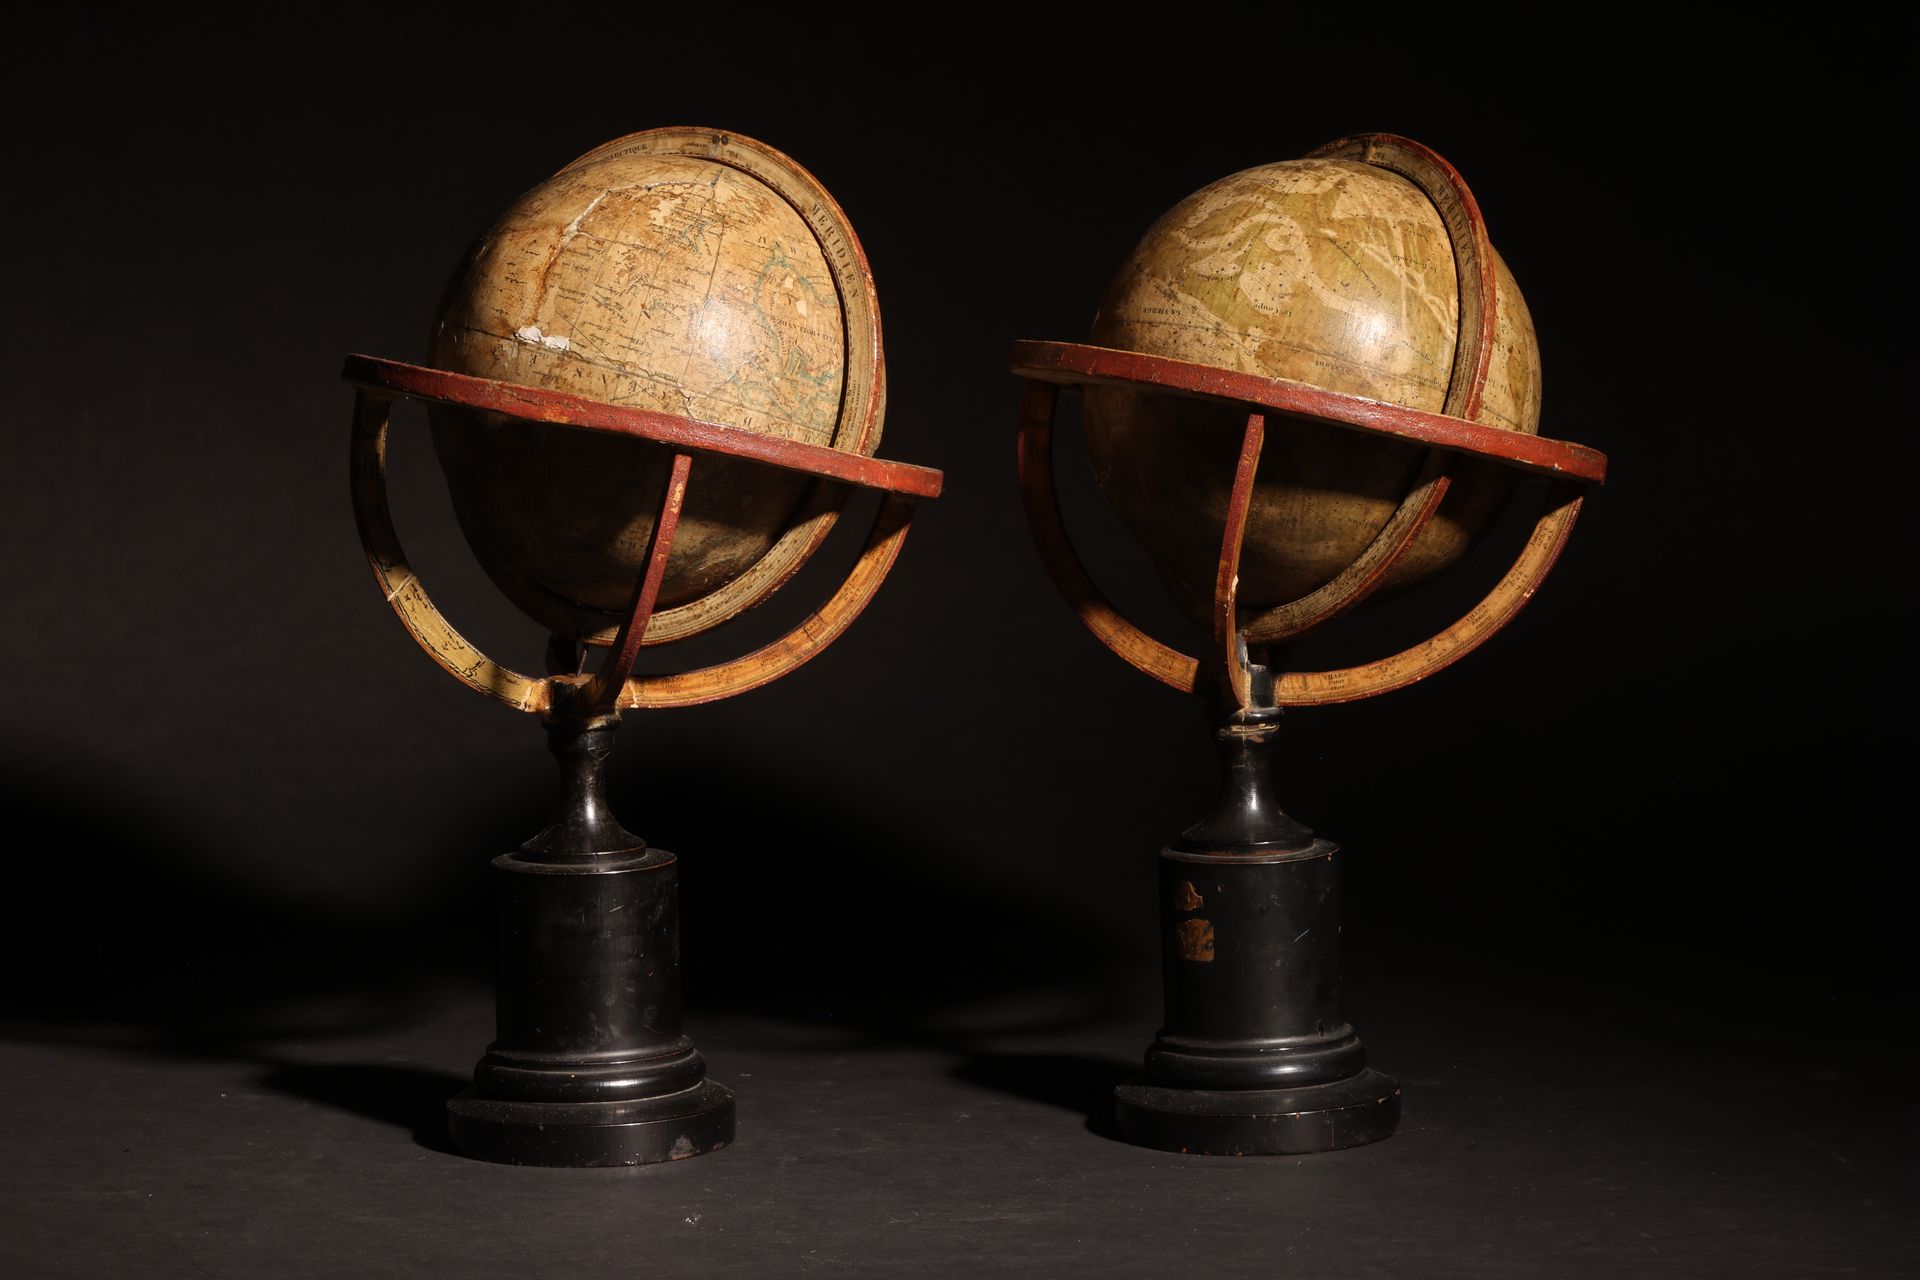 A Pair of 18th Century (?) Globes A pair of 18th Century (?) globes. Property of&hellip;